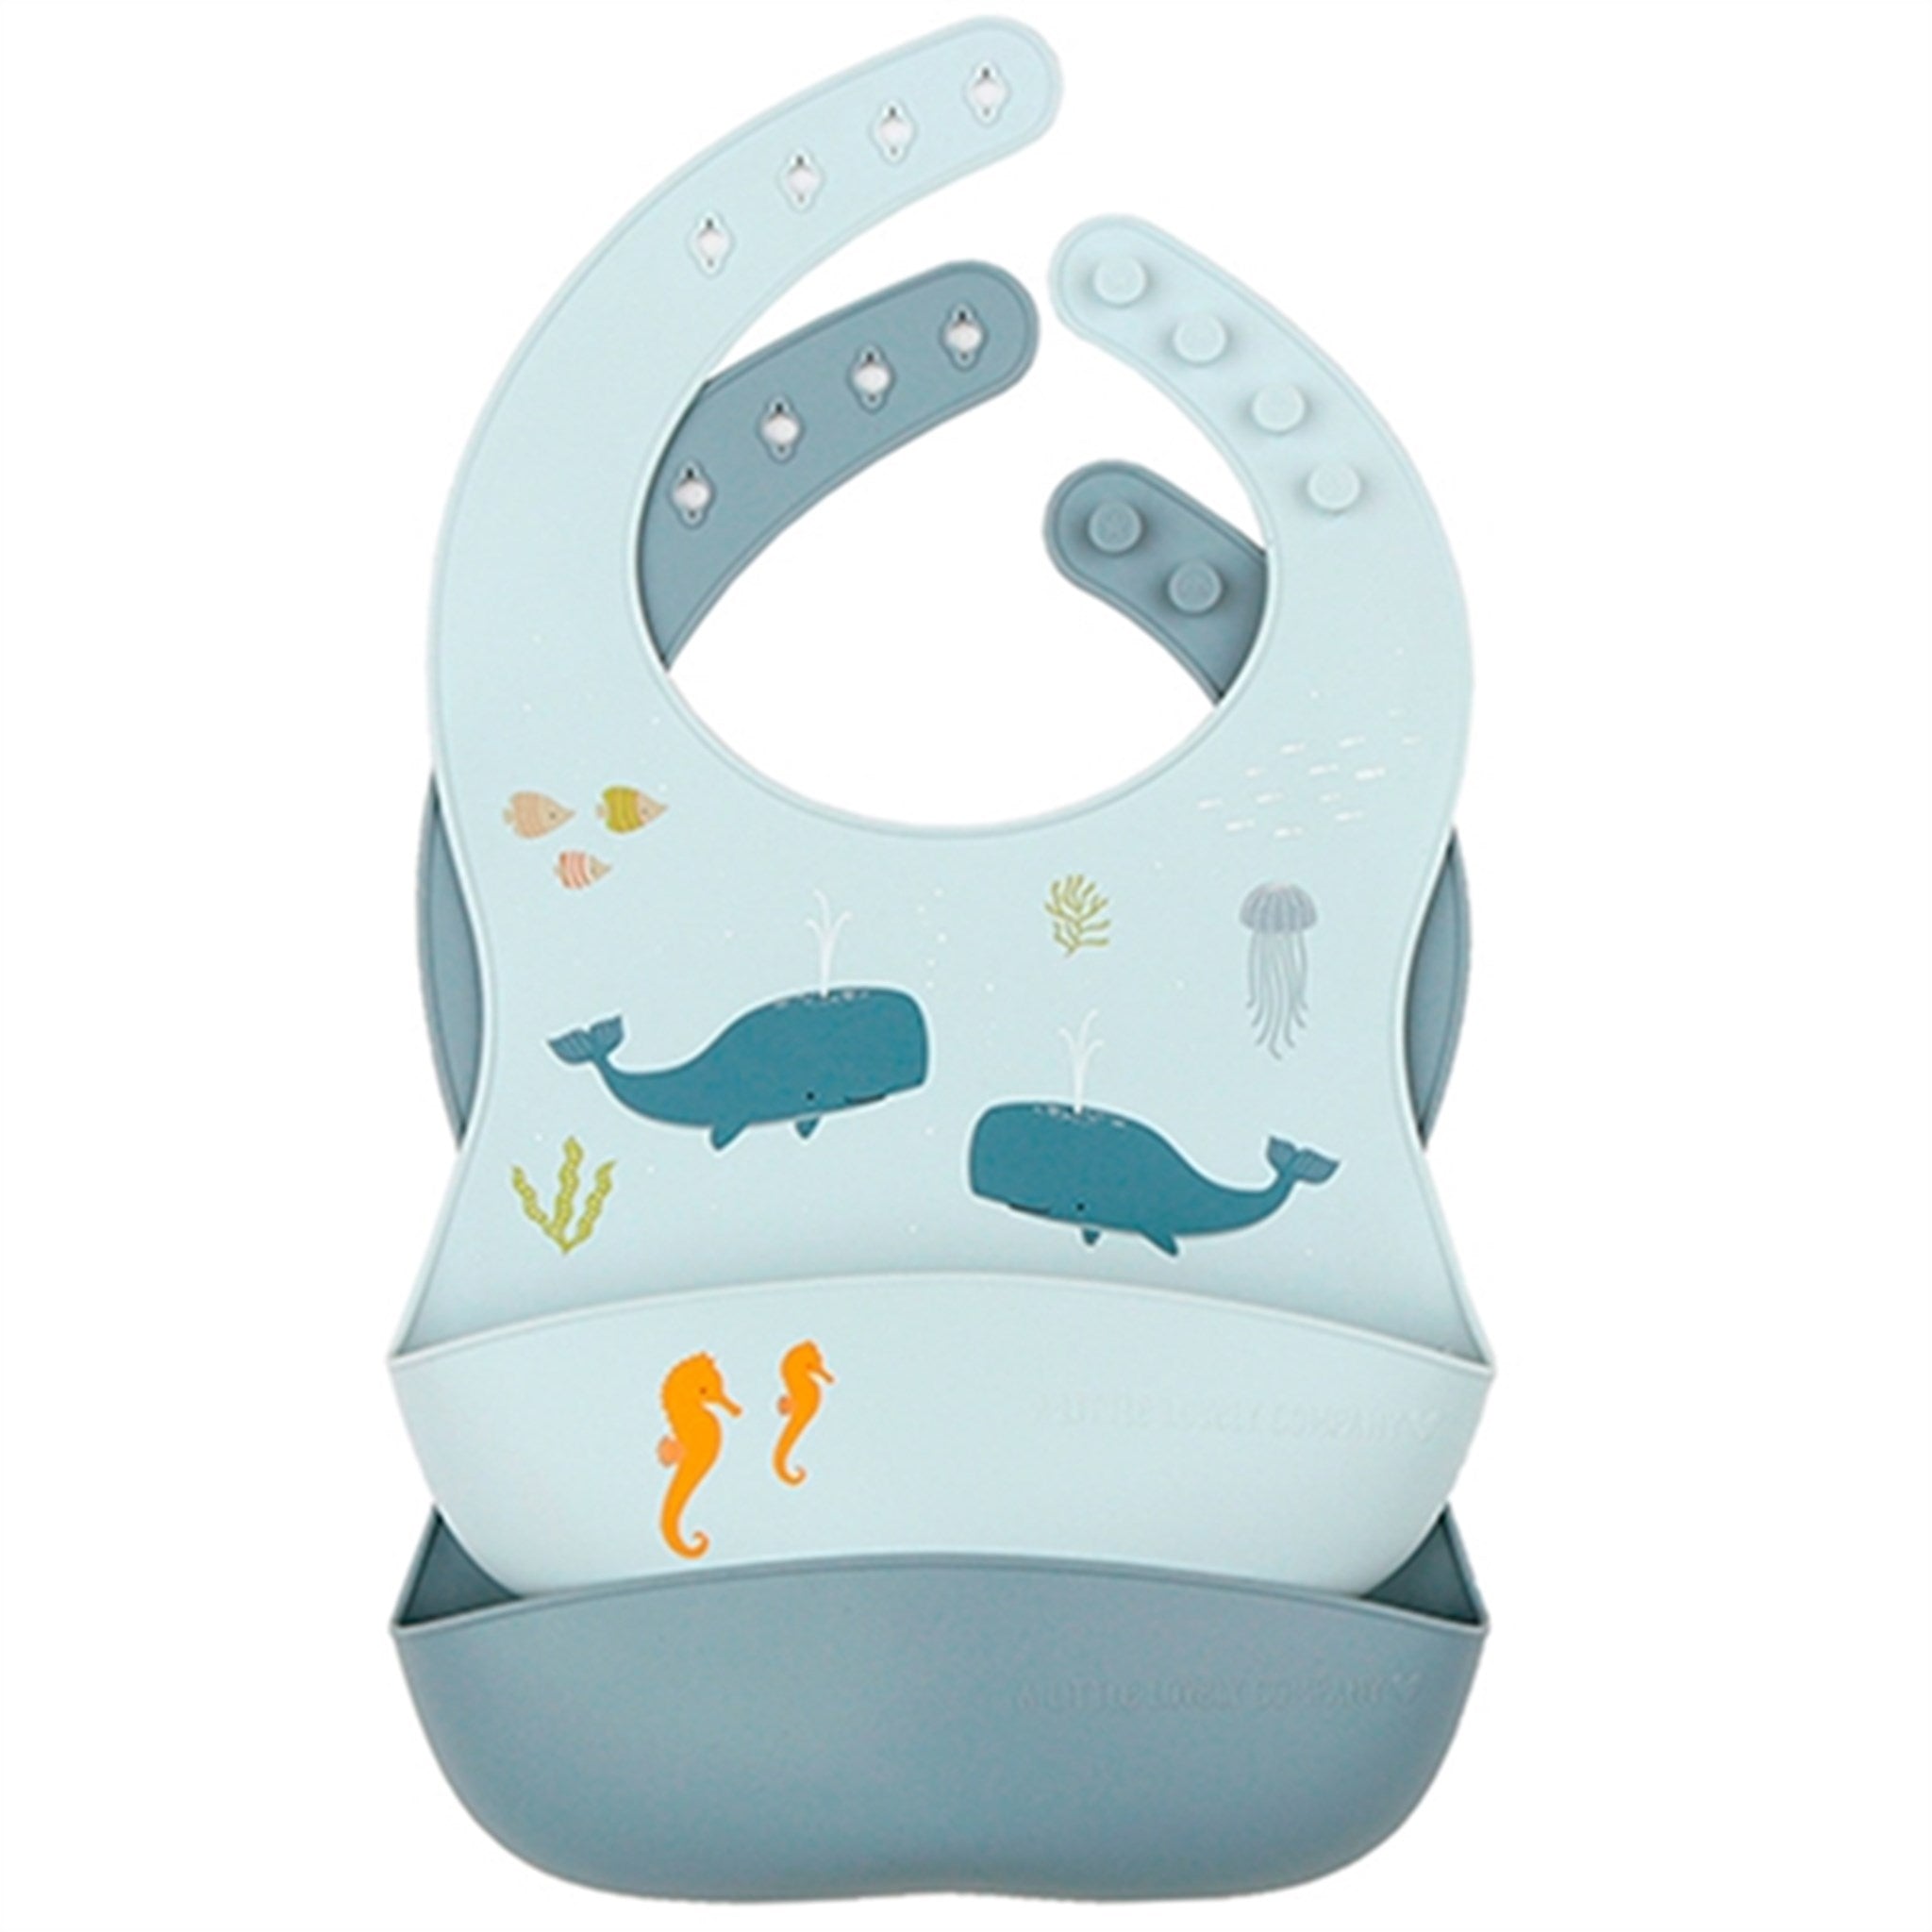 A Little Lovely Company Silicone Bib 2-pack Ocean